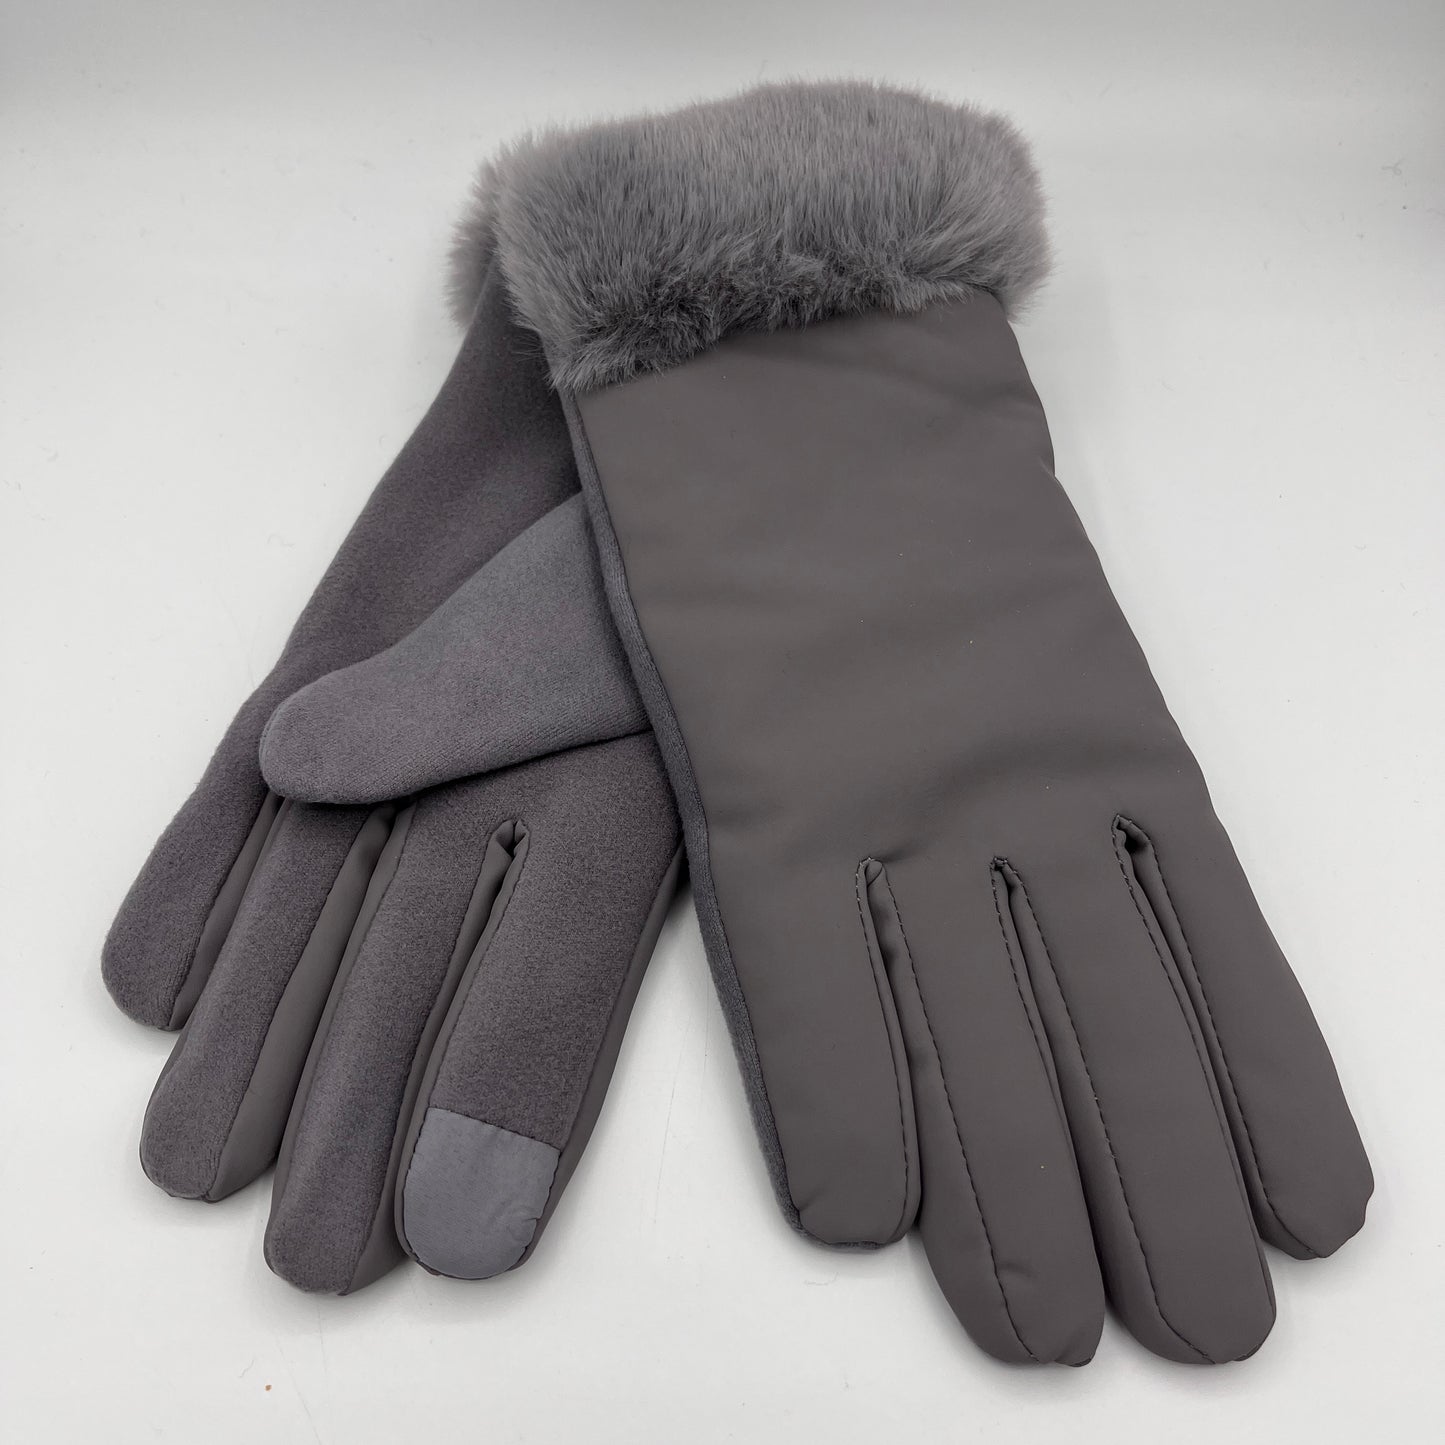 WOMEN'S PREMIUM SUPER SOFT FLEECE LINED GLOVES WITH TOUCHSCREEN TEXTING GLOVES